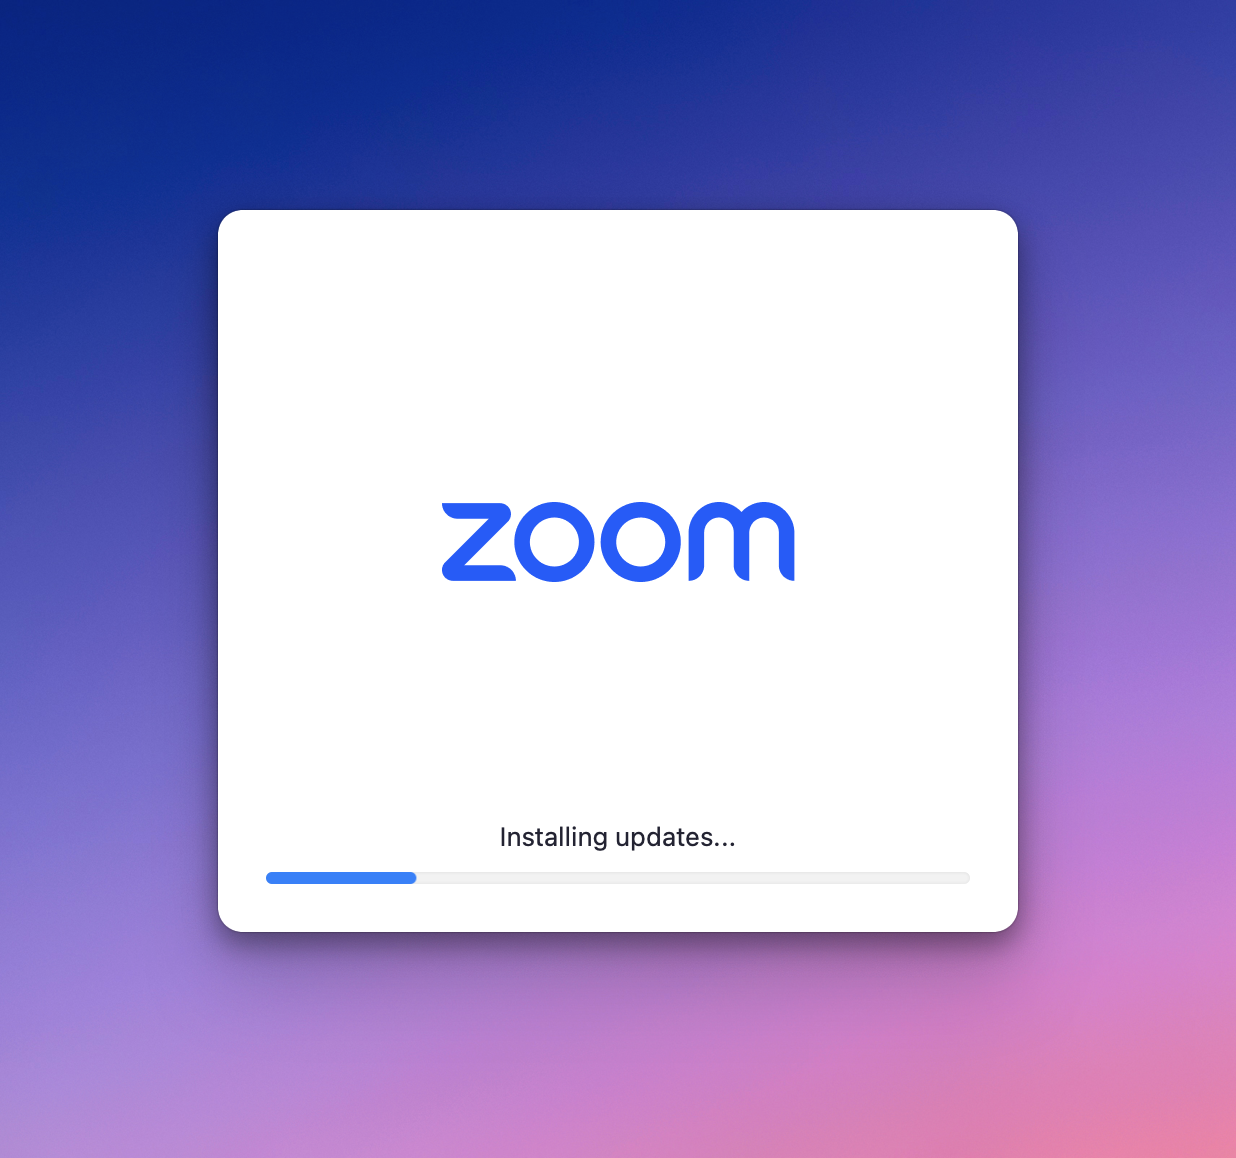 Zoom is updating image